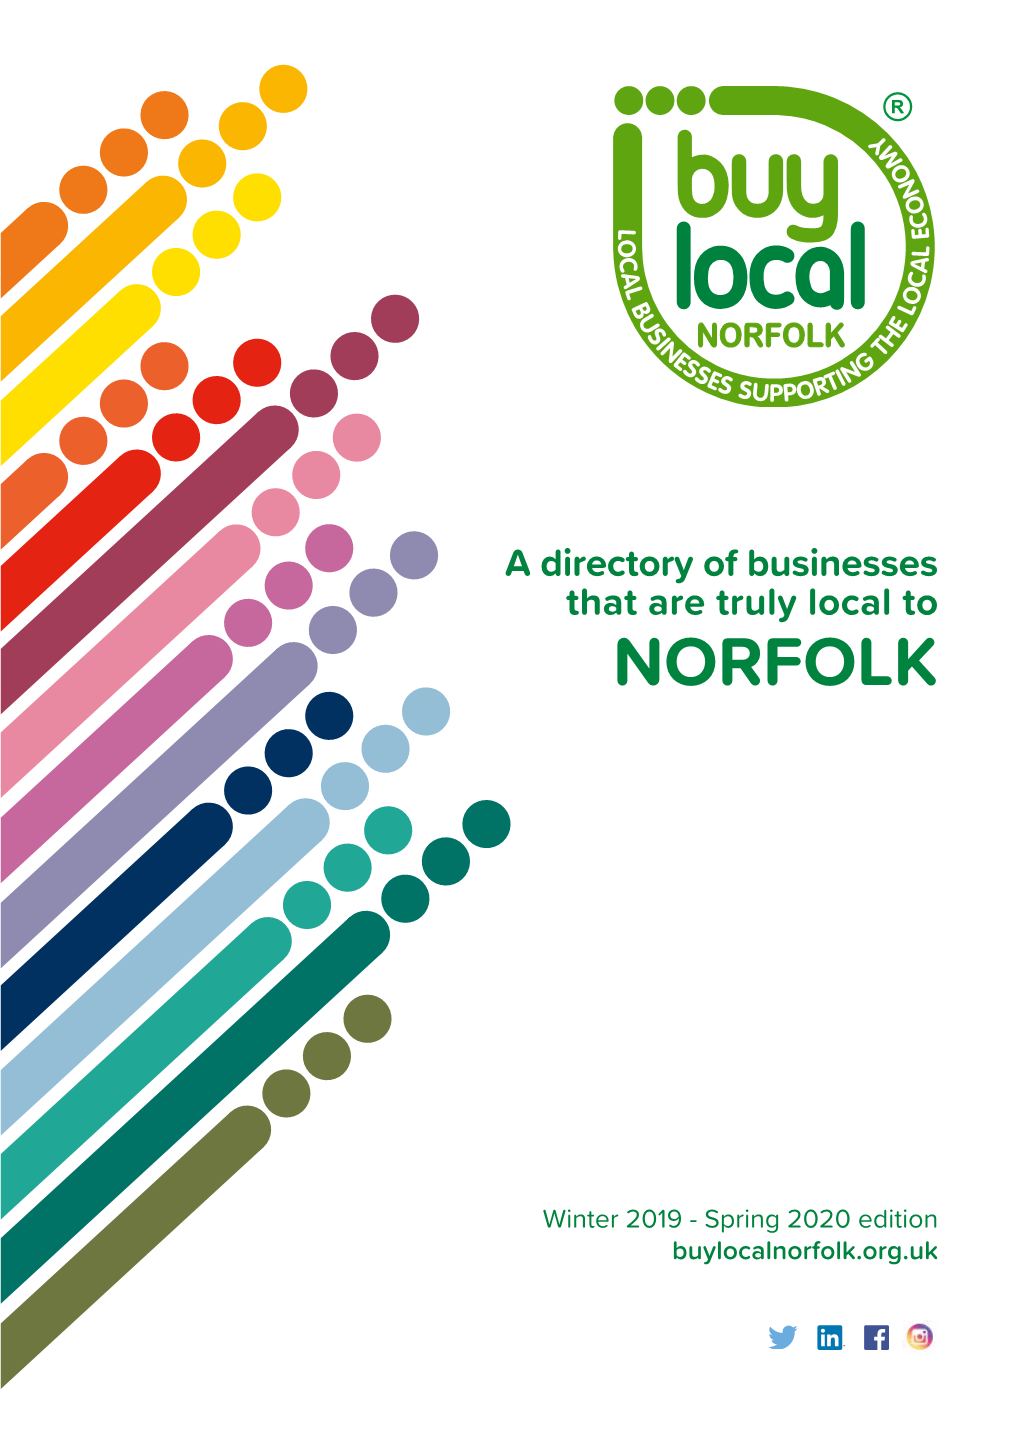 A Directory of Businesses That Are Truly Local to NORFOLK